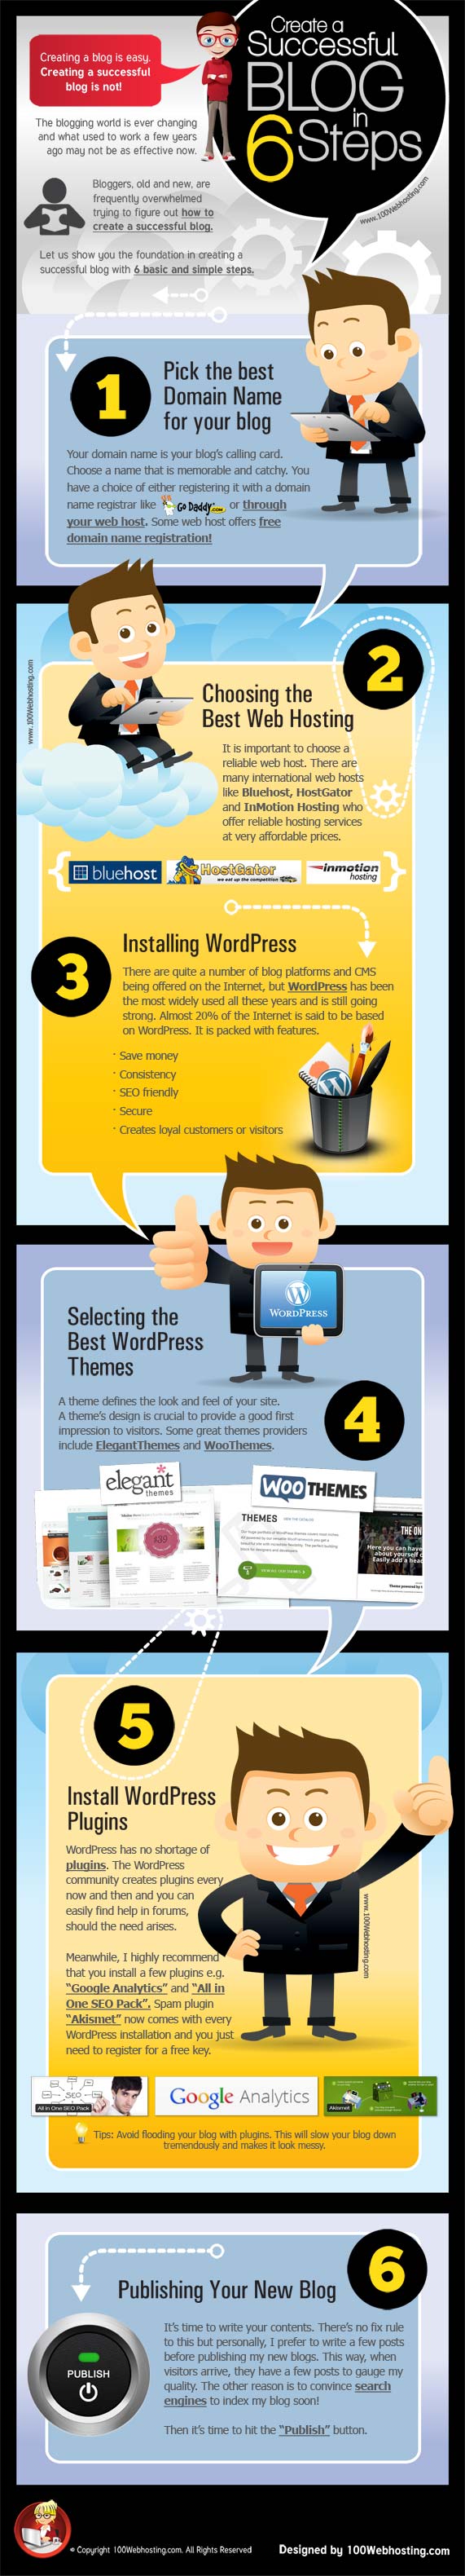 6 Steps To Create A Successful WordPress Blog - Infographic